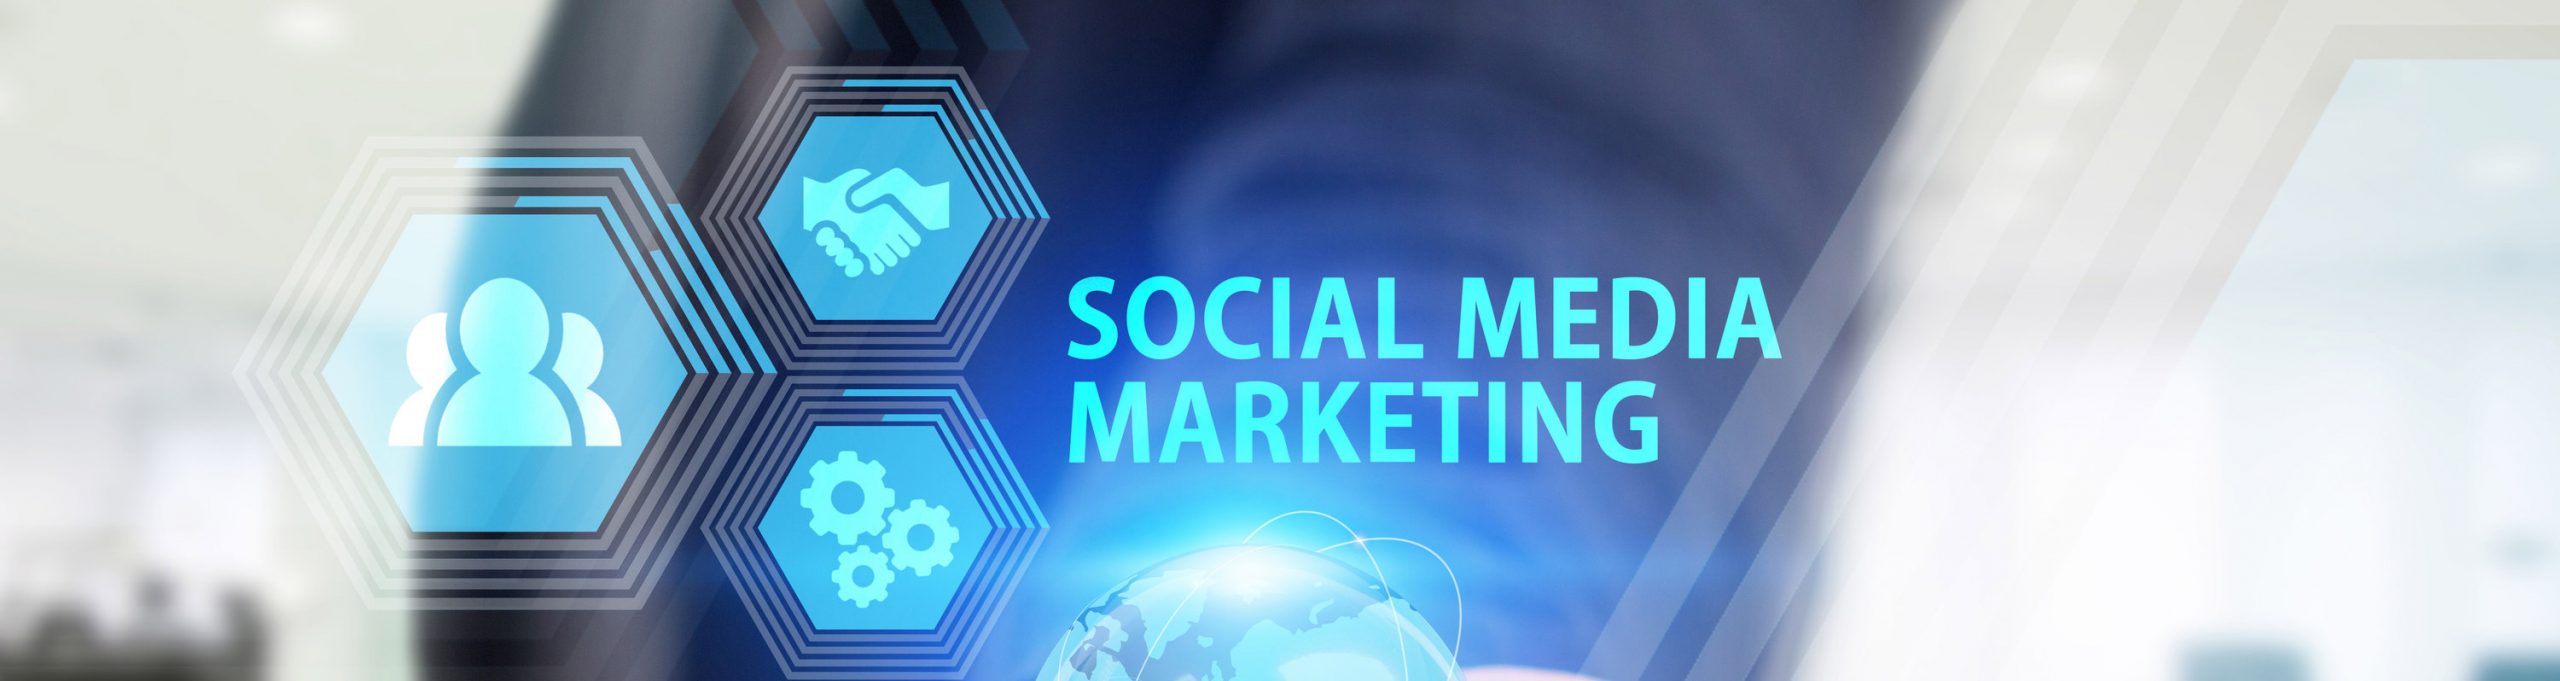 How to Make Healthcare Social Media Marketing for your Business More Rewarding